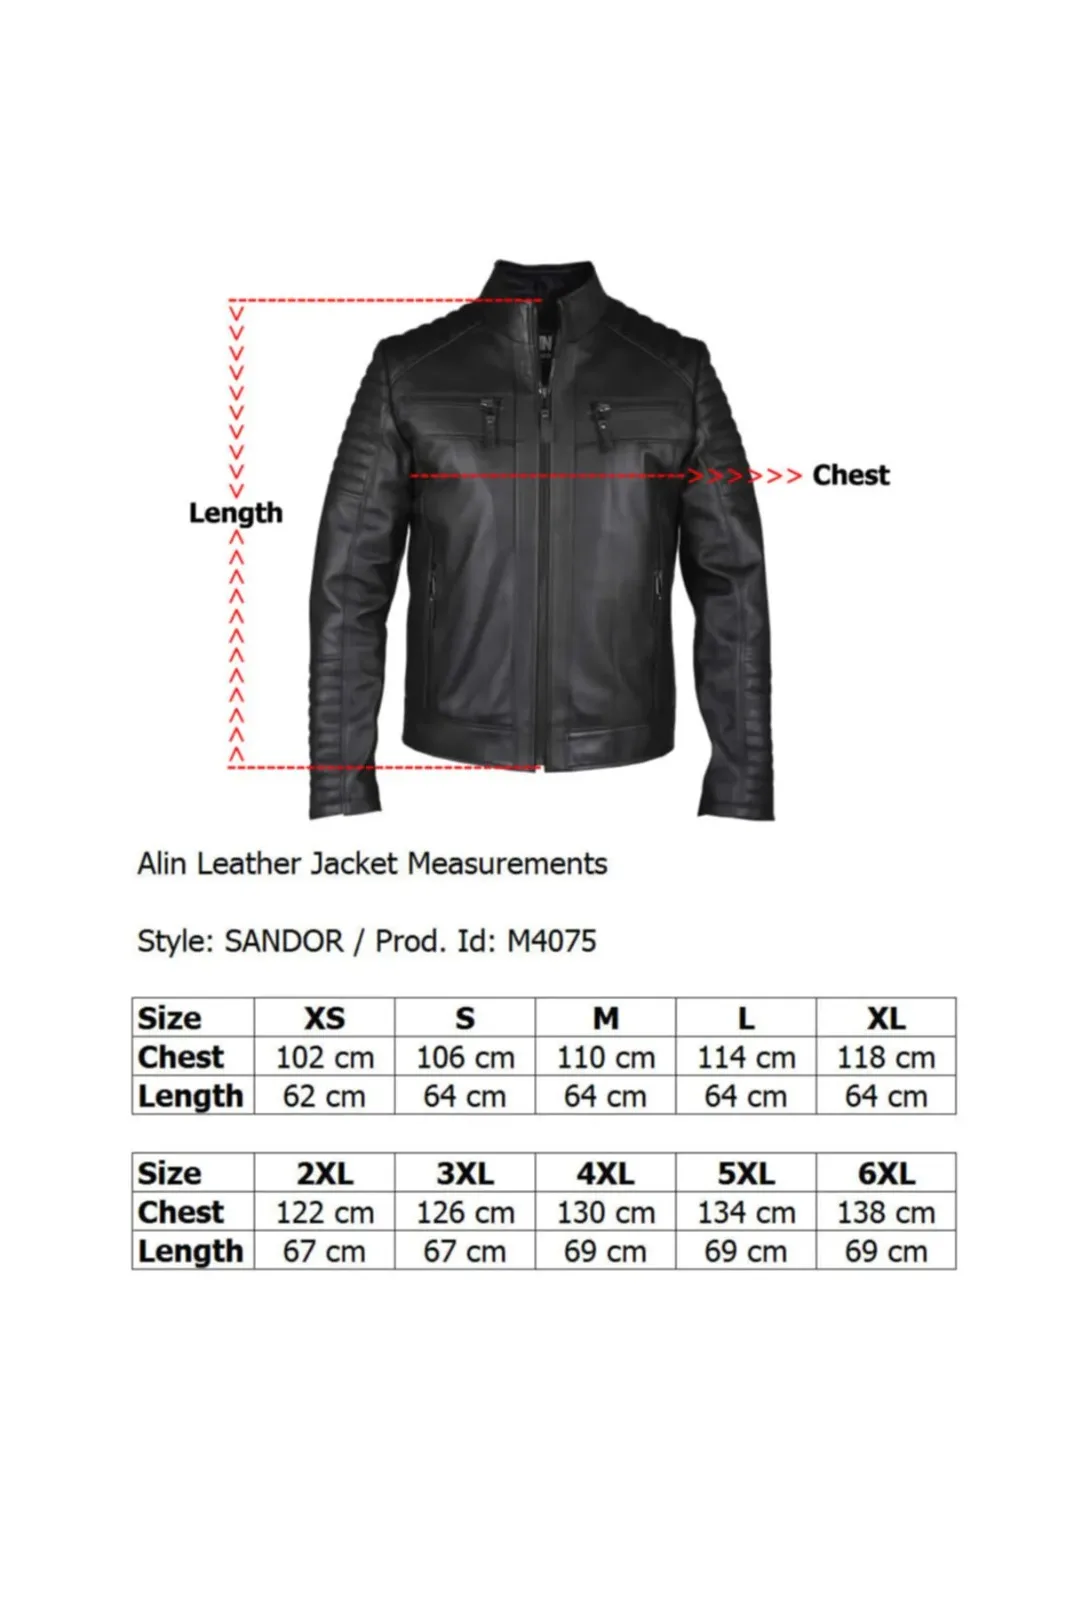 genuine leather men's jacket sport model original lambskin black colour softy 2022 trend appearance made in turkey e-150200 genuine leather coats & jackets with hood